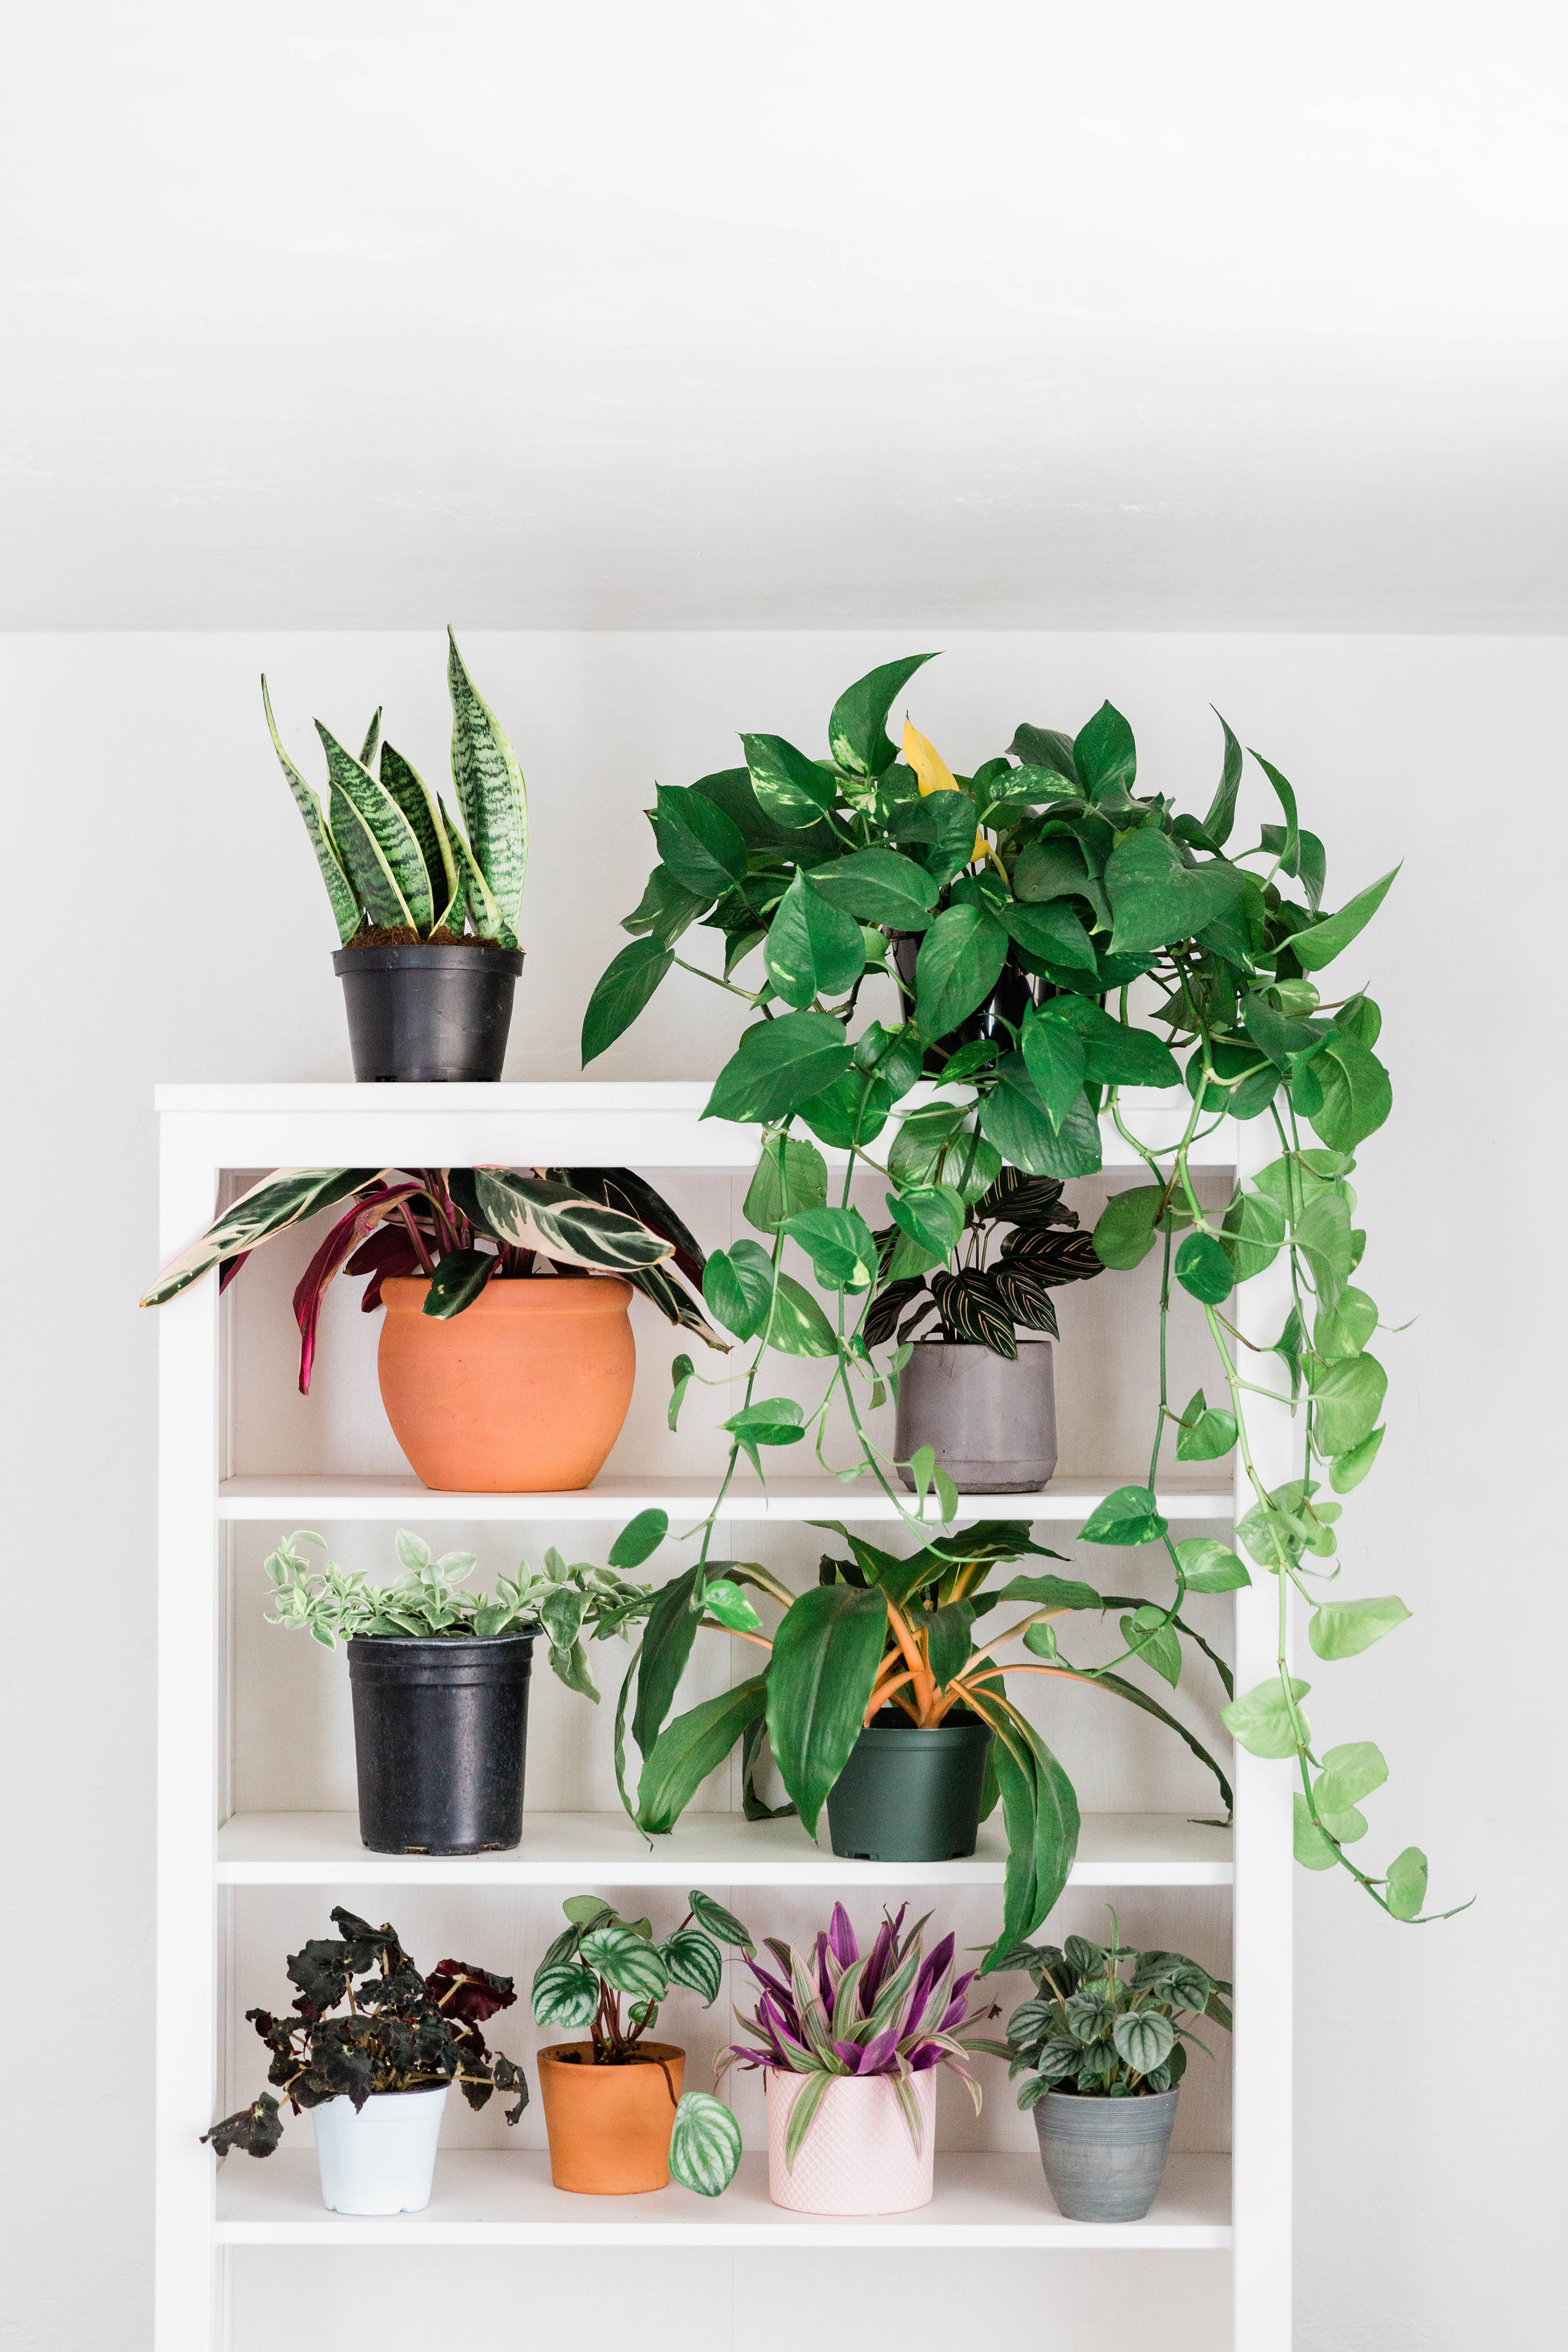 White bookshelf with a variety of potted plants